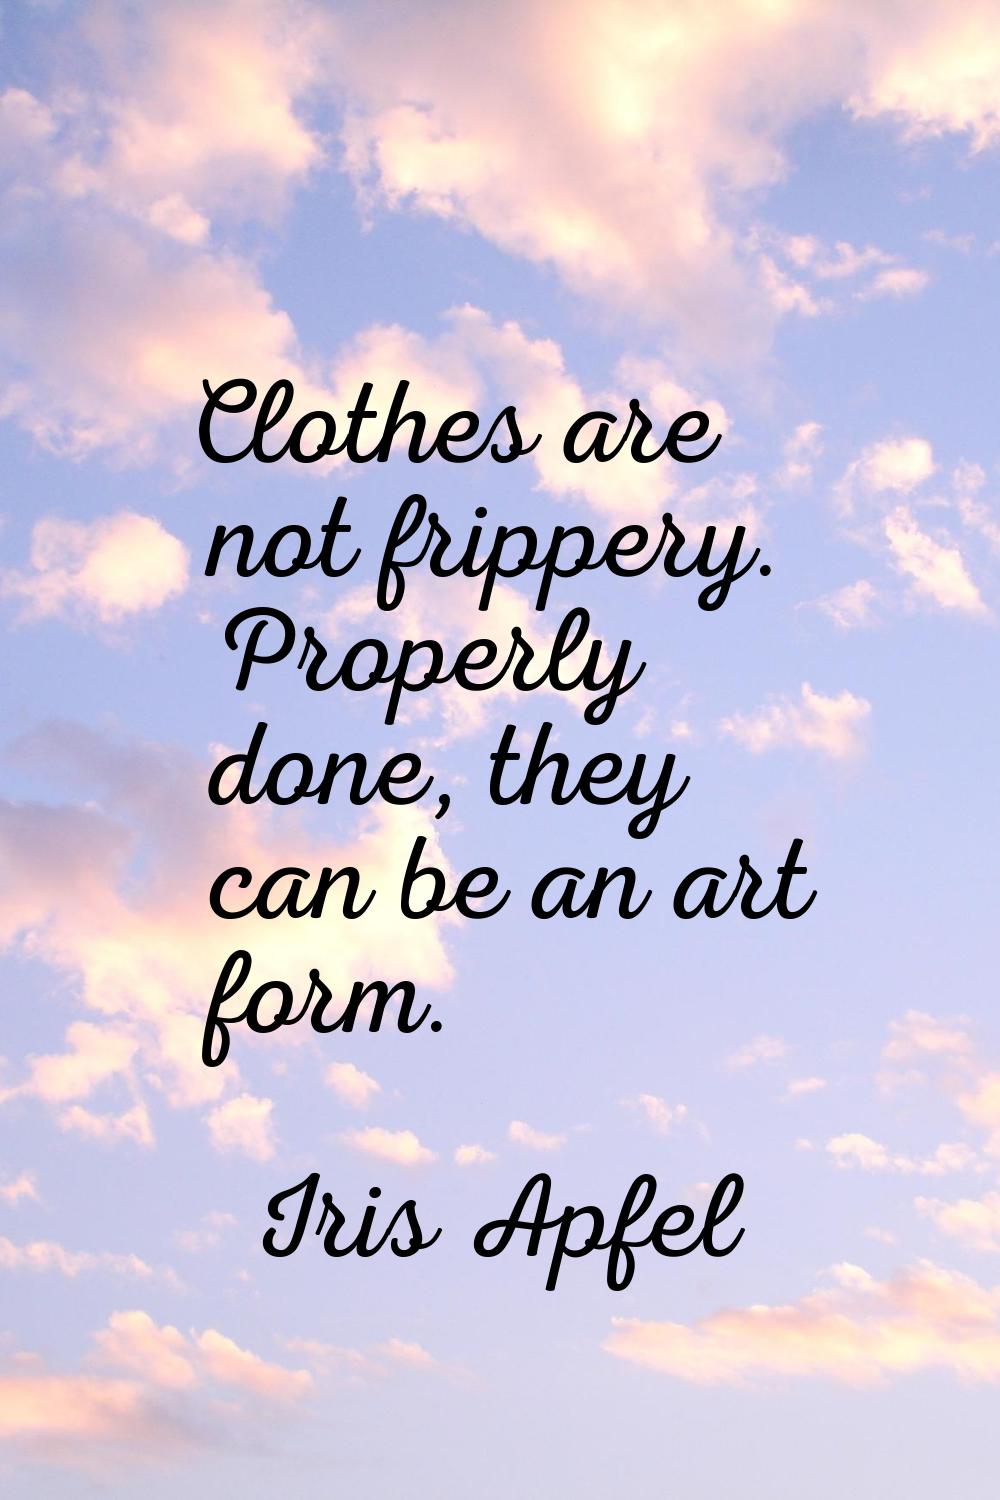 Clothes are not frippery. Properly done, they can be an art form.